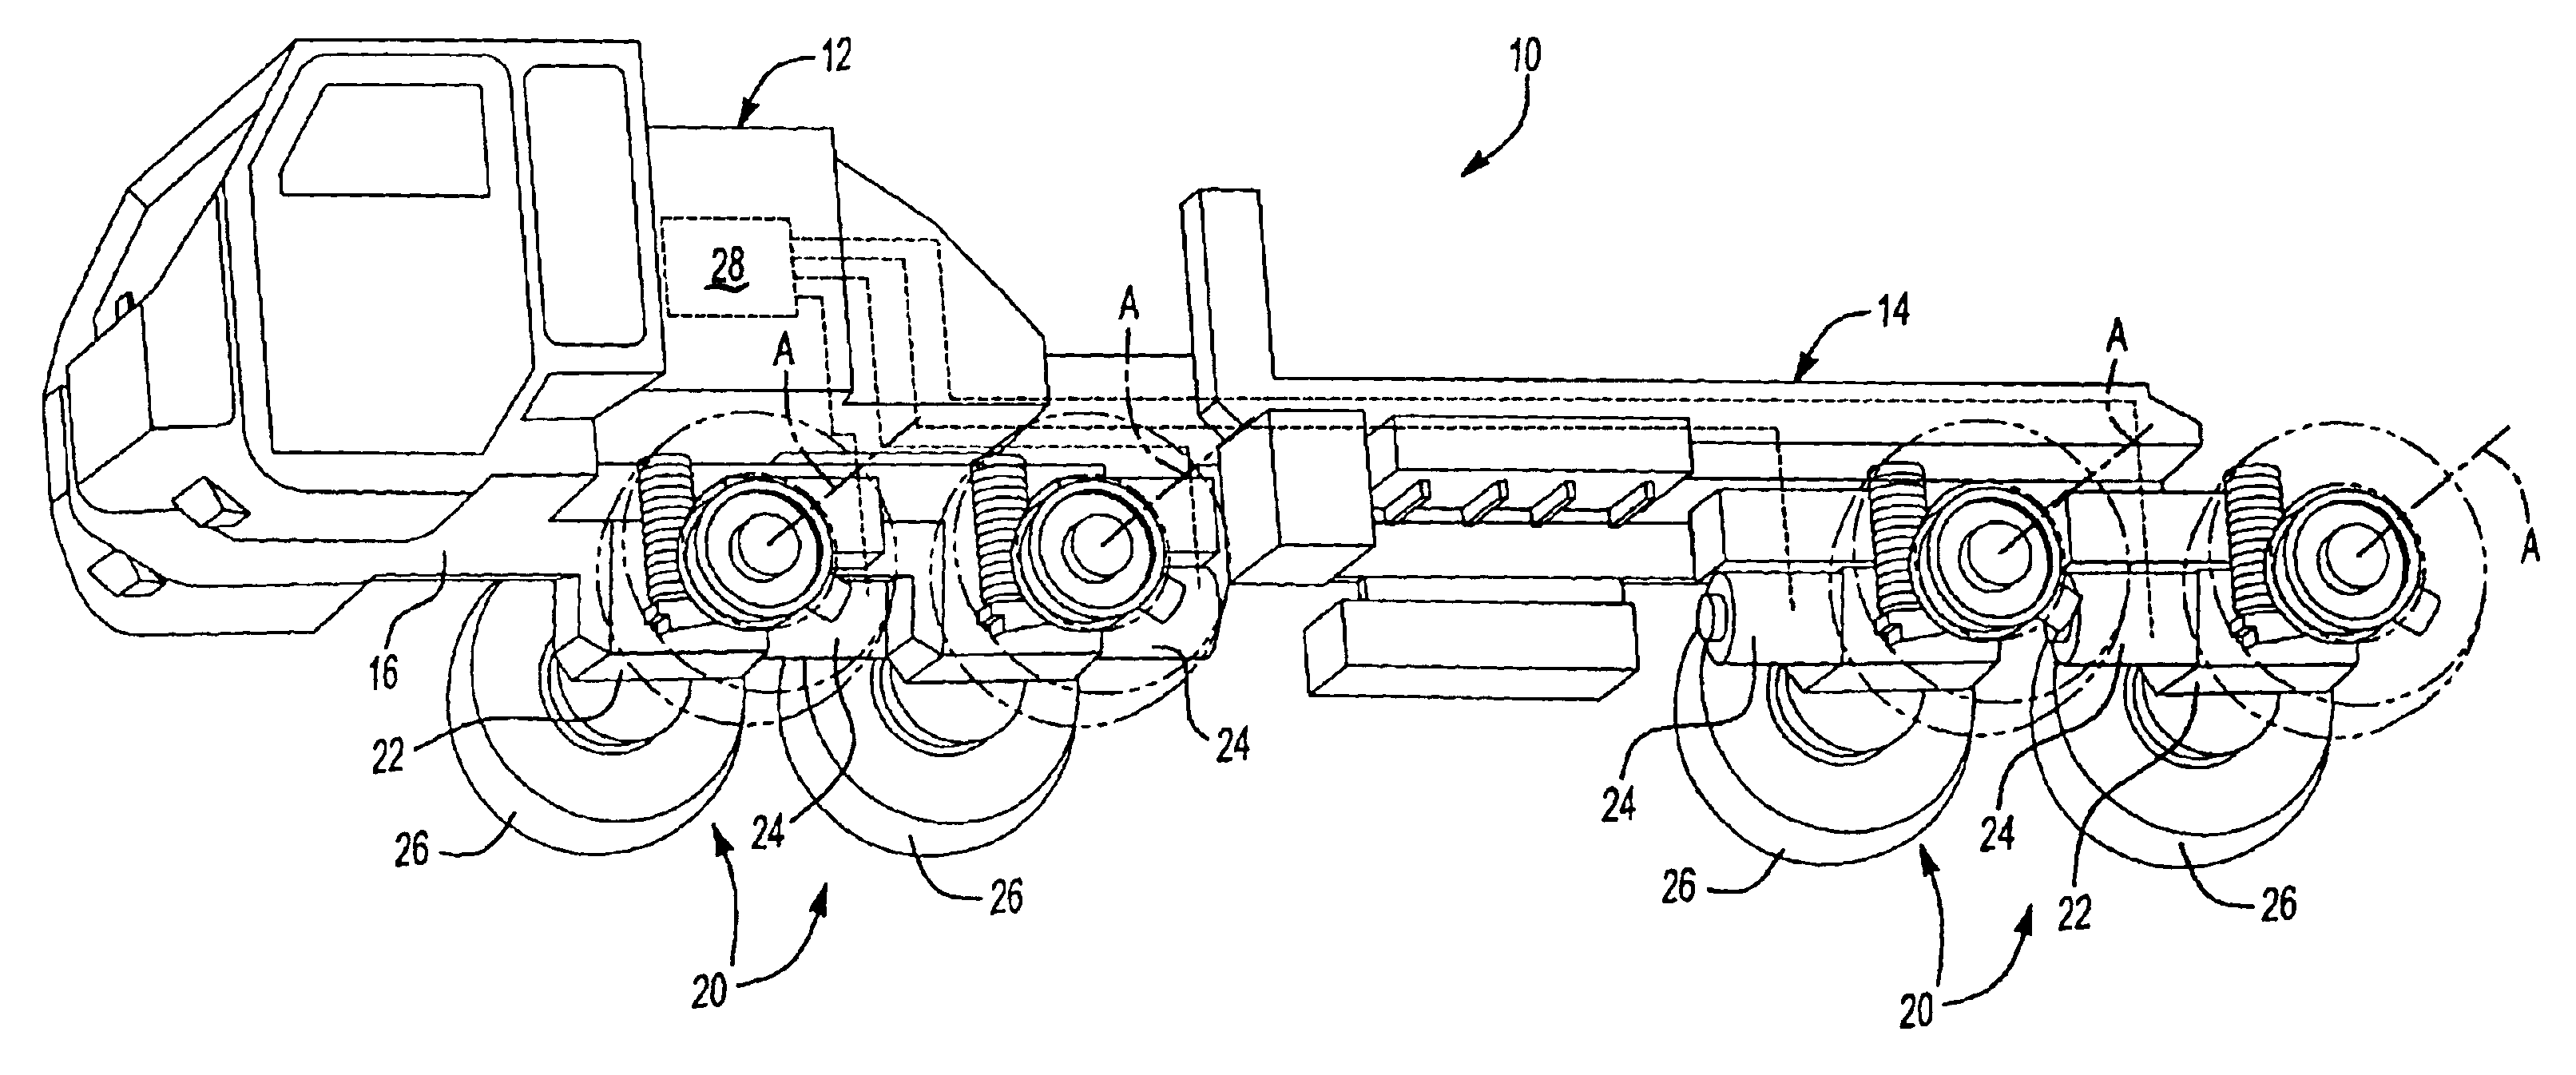 Two-speed gearbox with integrated differential